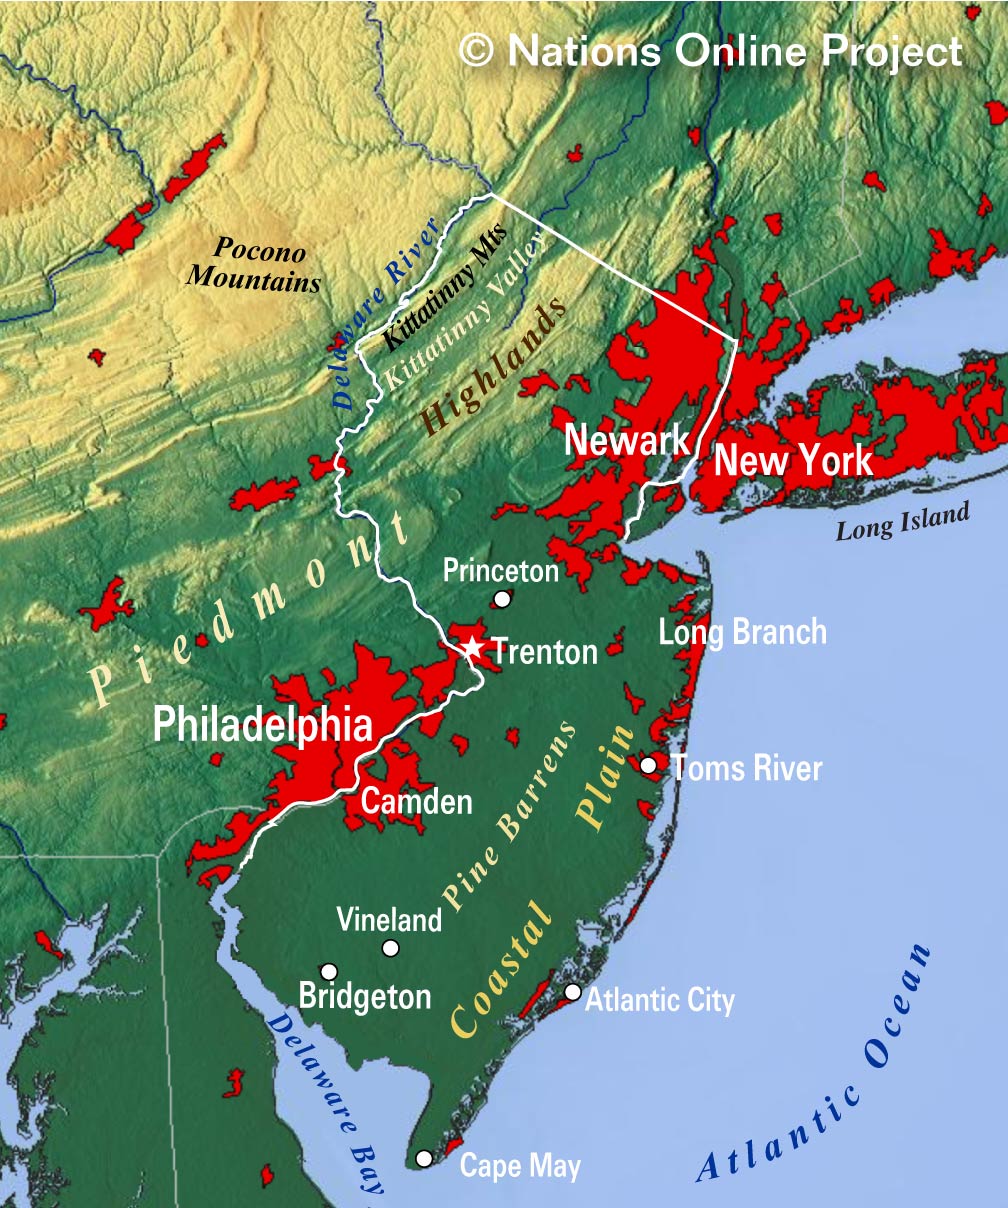 heerser sieraden Neuropathie Map of the State of New Jersey, USA - Nations Online Project